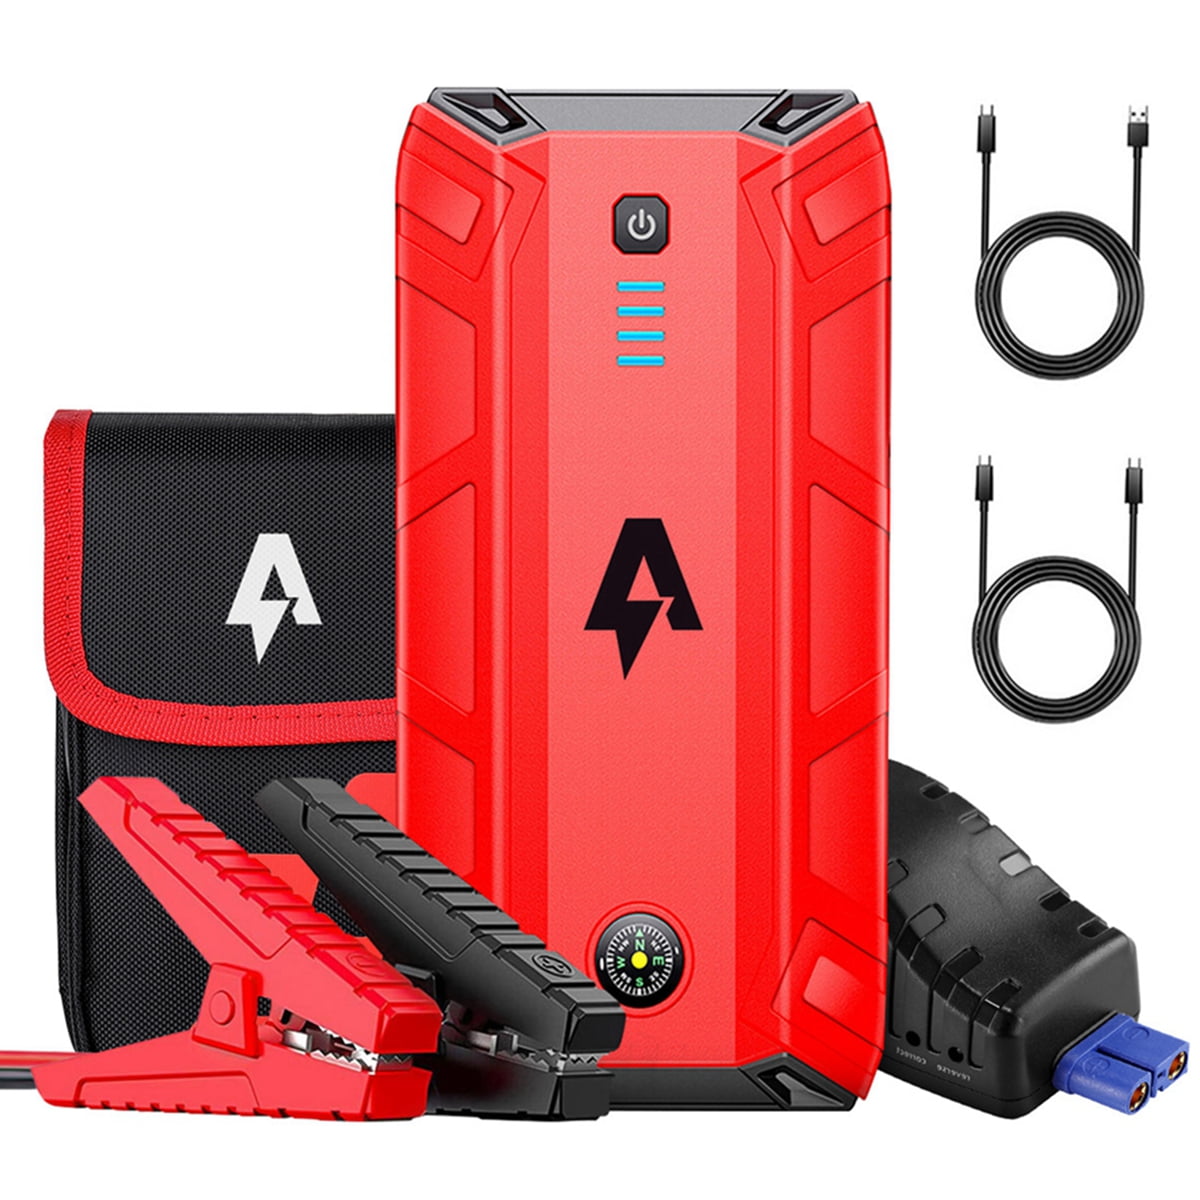 BUTURE 5000A Car Jump Starter (All Gas/10L Diesel) Smart Portable Battery  Pack, 12V Safe Jump Box with Extended Jumper Cables, Fast Charge, 160W DC